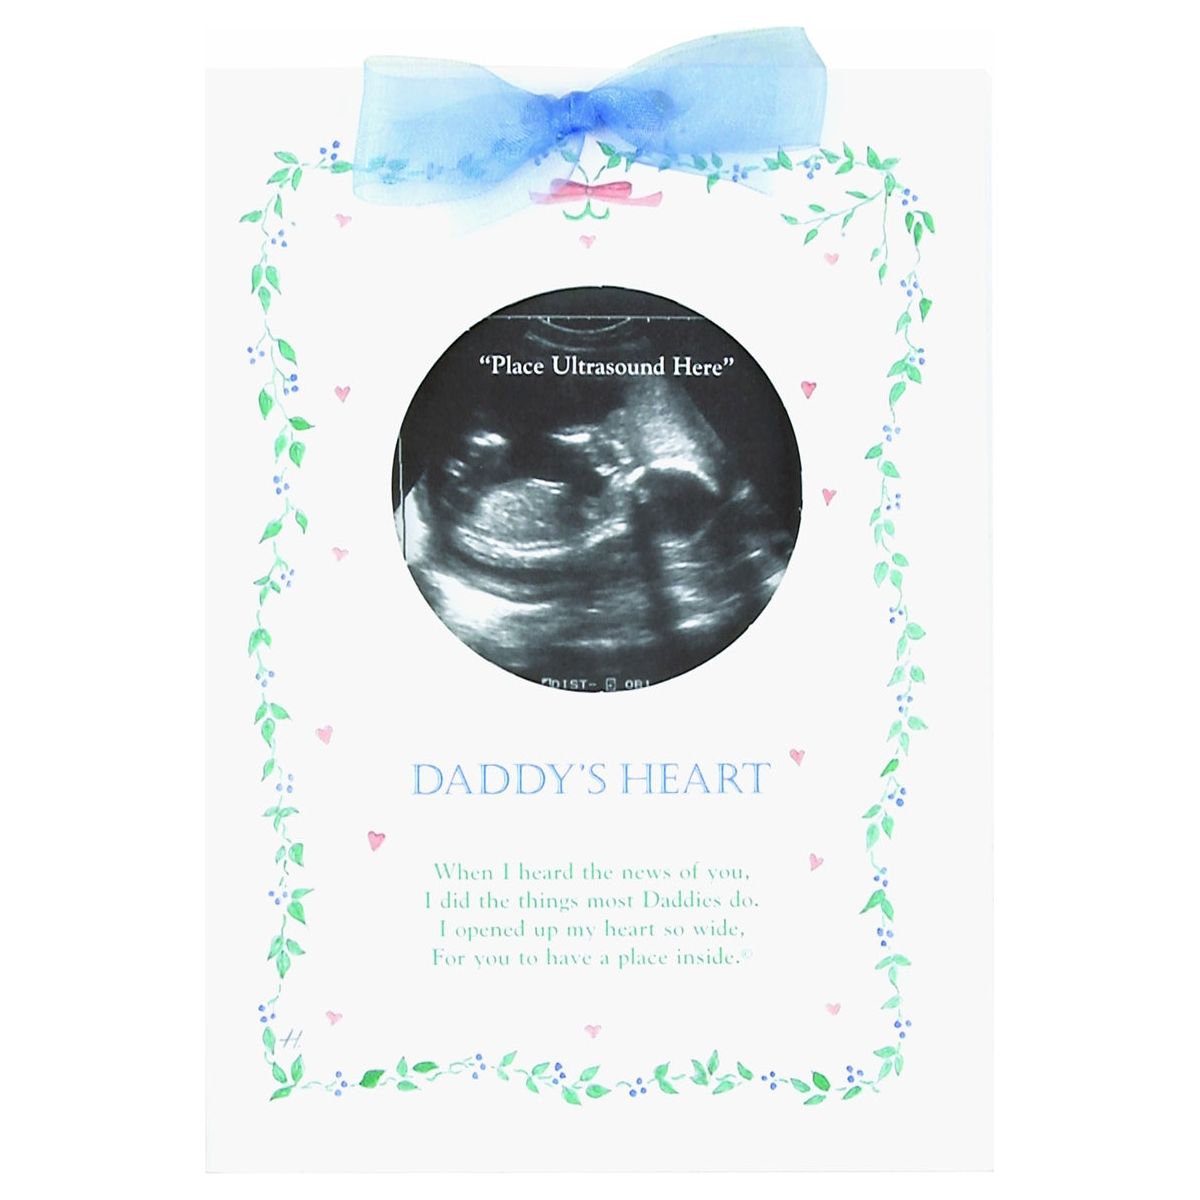 5x7 Daddy&#39;s Heart greeting card with new baby poem, blue organza accent ribbon, and circular opening for baby&#39;s ultrasound picture.